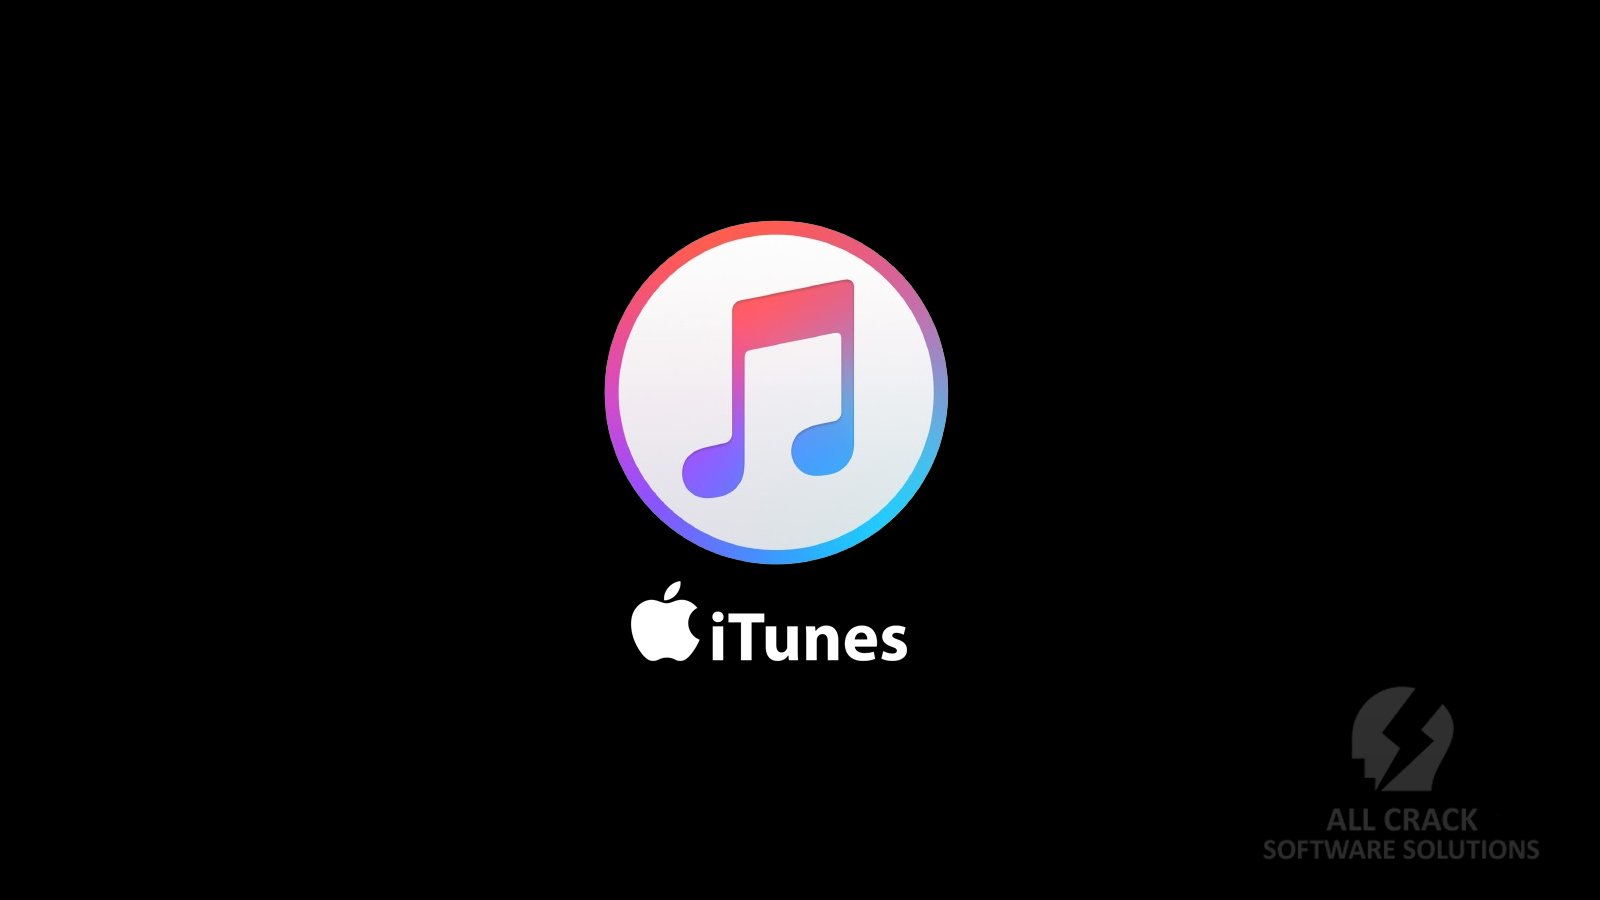 Apple iTunes Download Free Latest Version With Activated